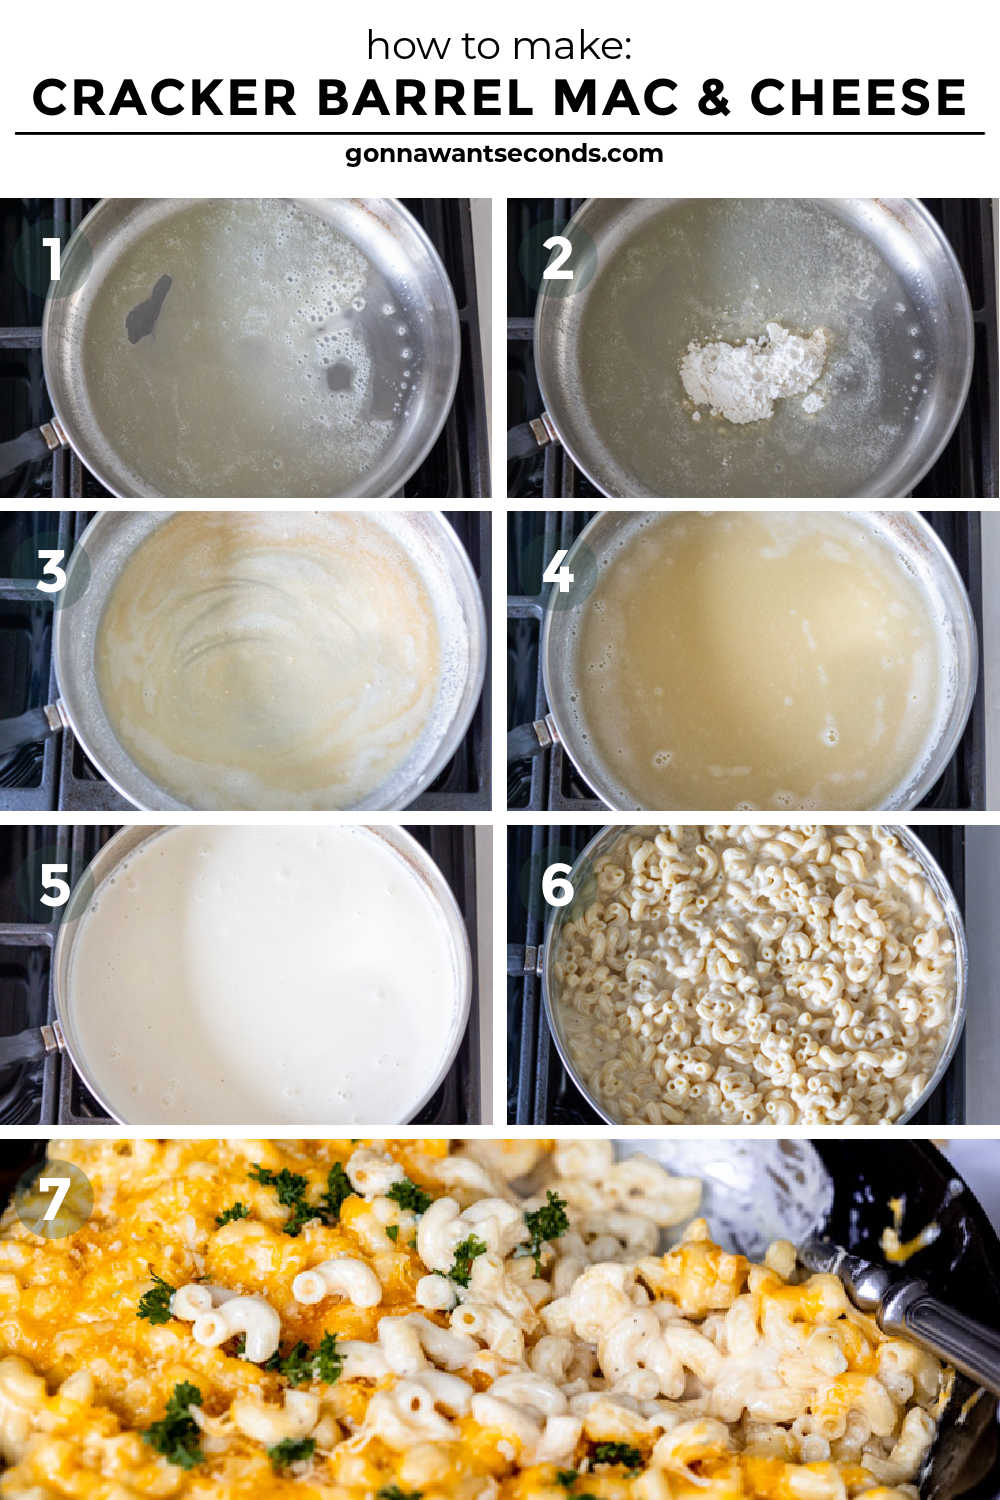 step by step how to make cracker barrel mac and cheese